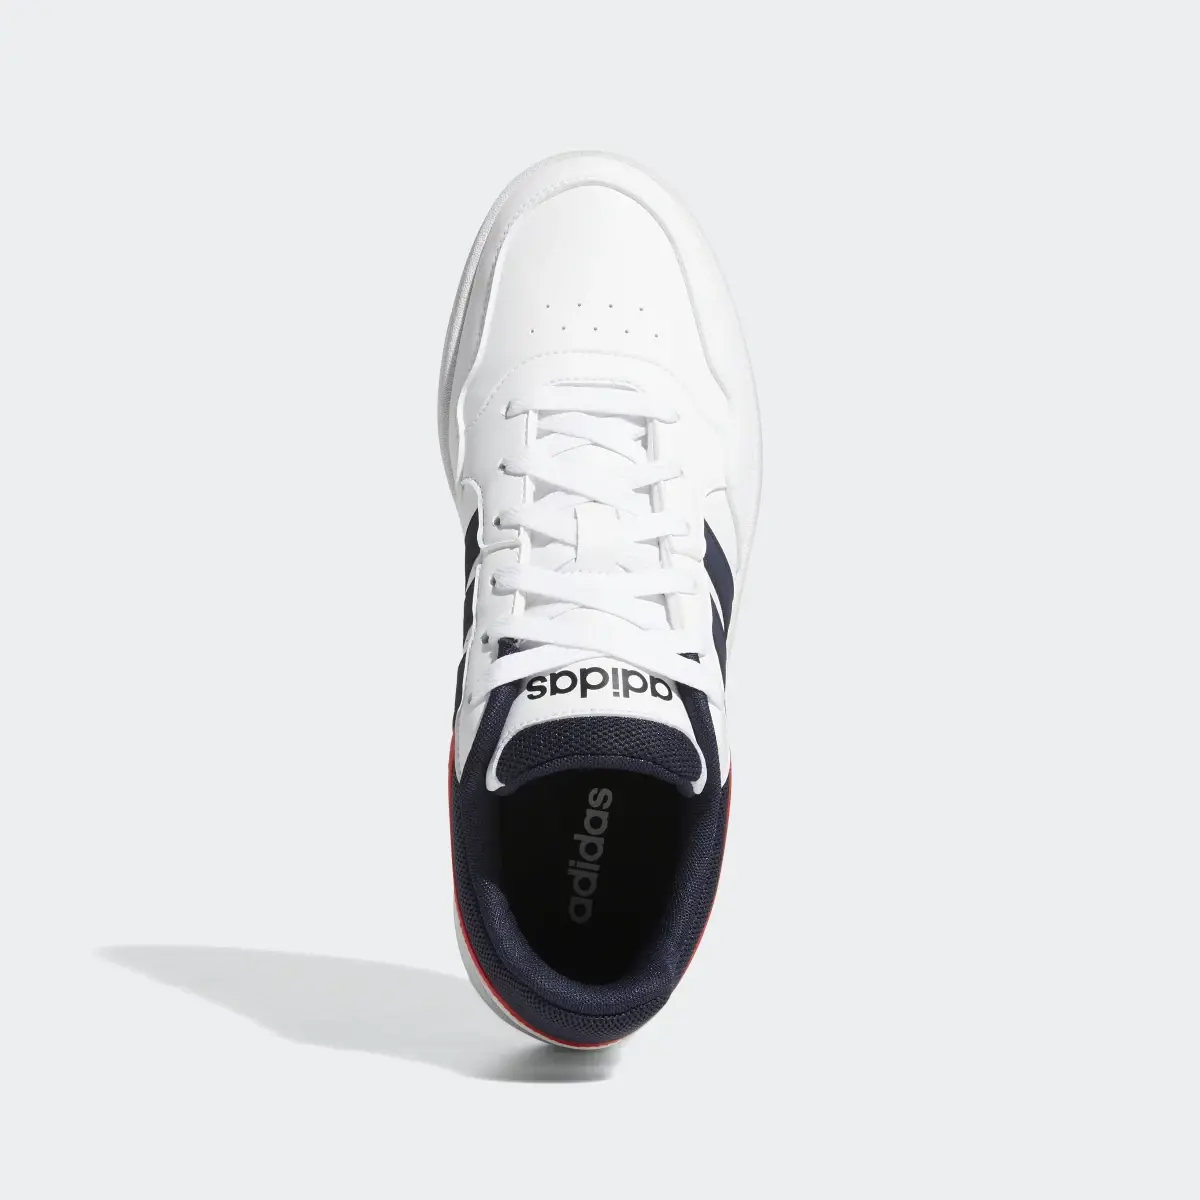 Adidas Hoops 3.0 Low Classic Vintage Shoes. 3